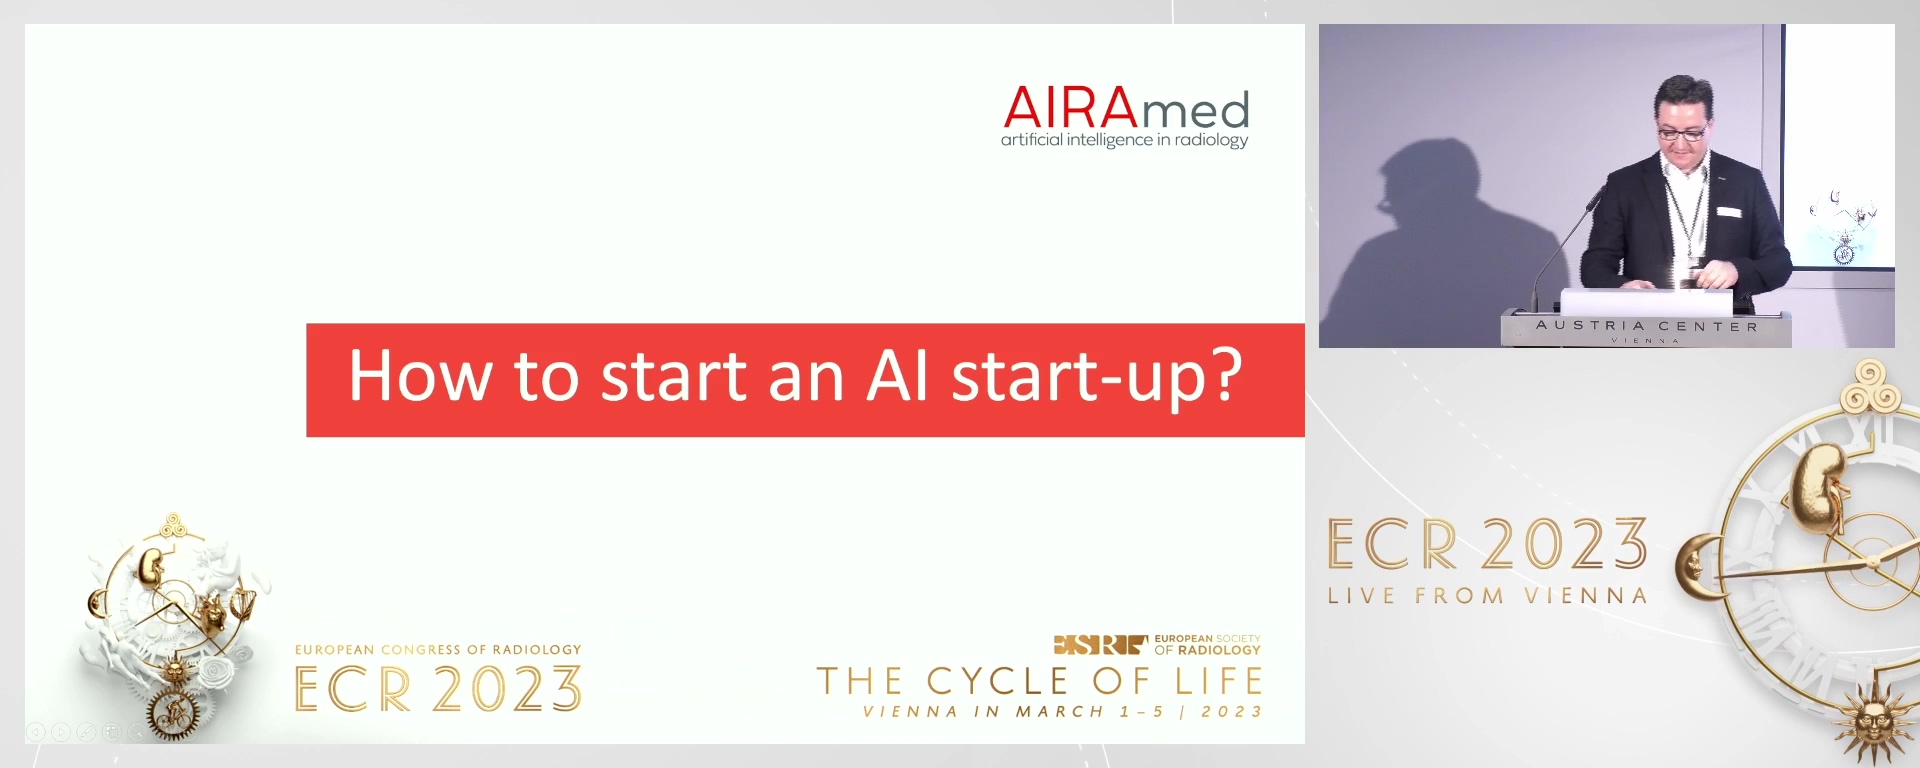 Artificial intelligence (AI): how to start a 'start-up'